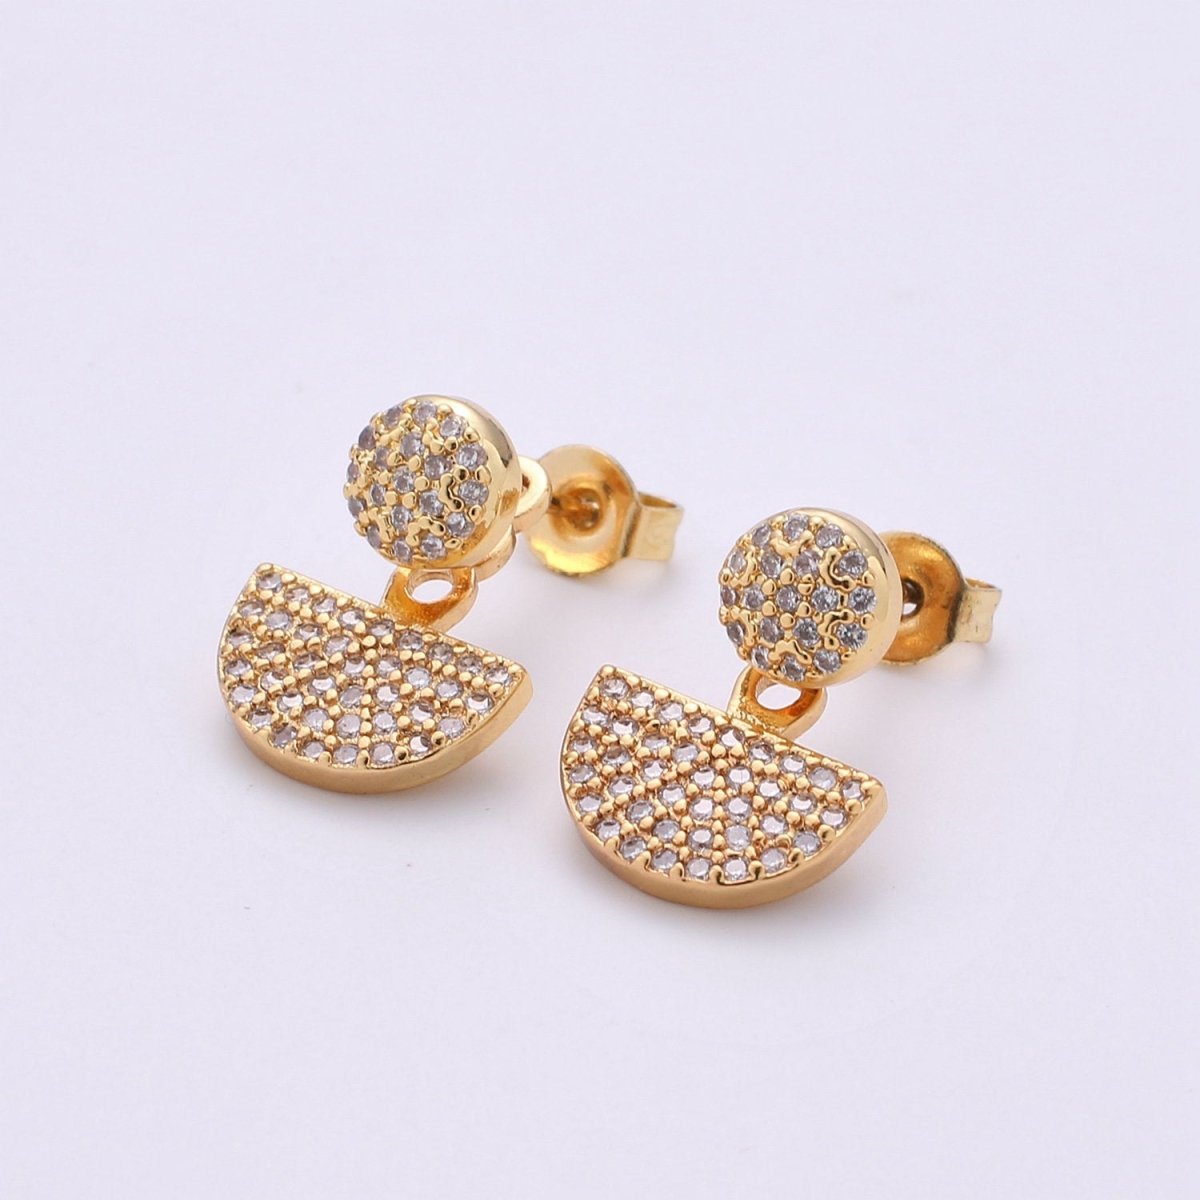 Dot and Fan Earrings, Gold Stud Earring 24K Gold Filled Post Earrings, Colorful Micro Pave Gold Dot and Fan Earrings, Tiny Gold StudS Q-268 - Q-270 - DLUXCA